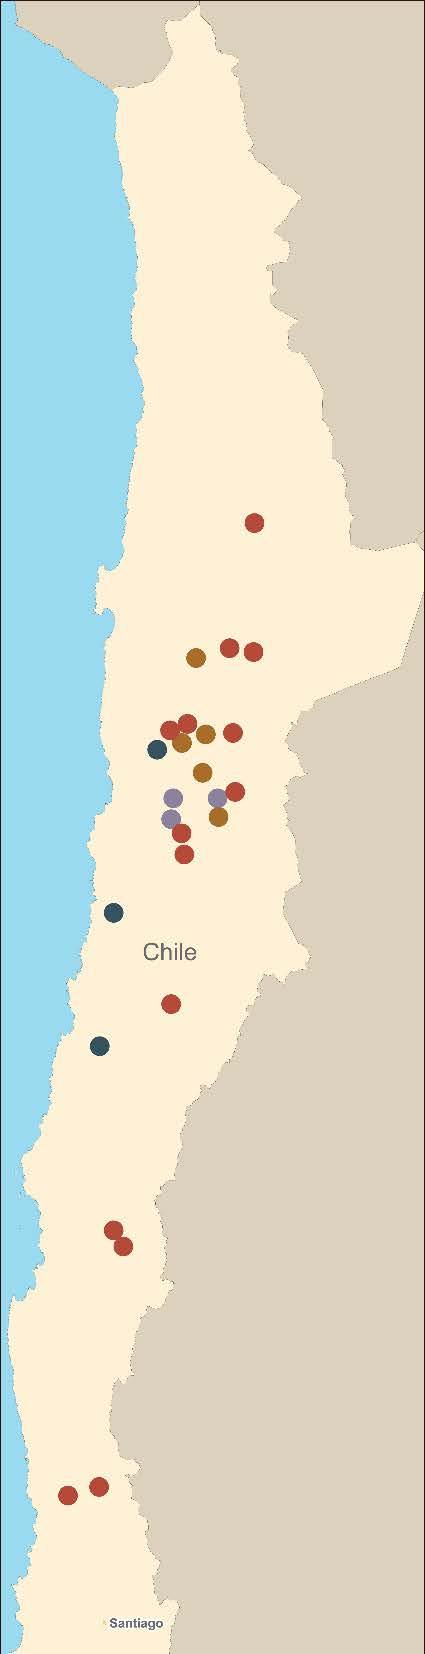 October 2017 Block 3-Culebra is a large property block situated along the Domeyko Cordillera porphyry copper belt in northern Chile, which is host to some of the world s largest